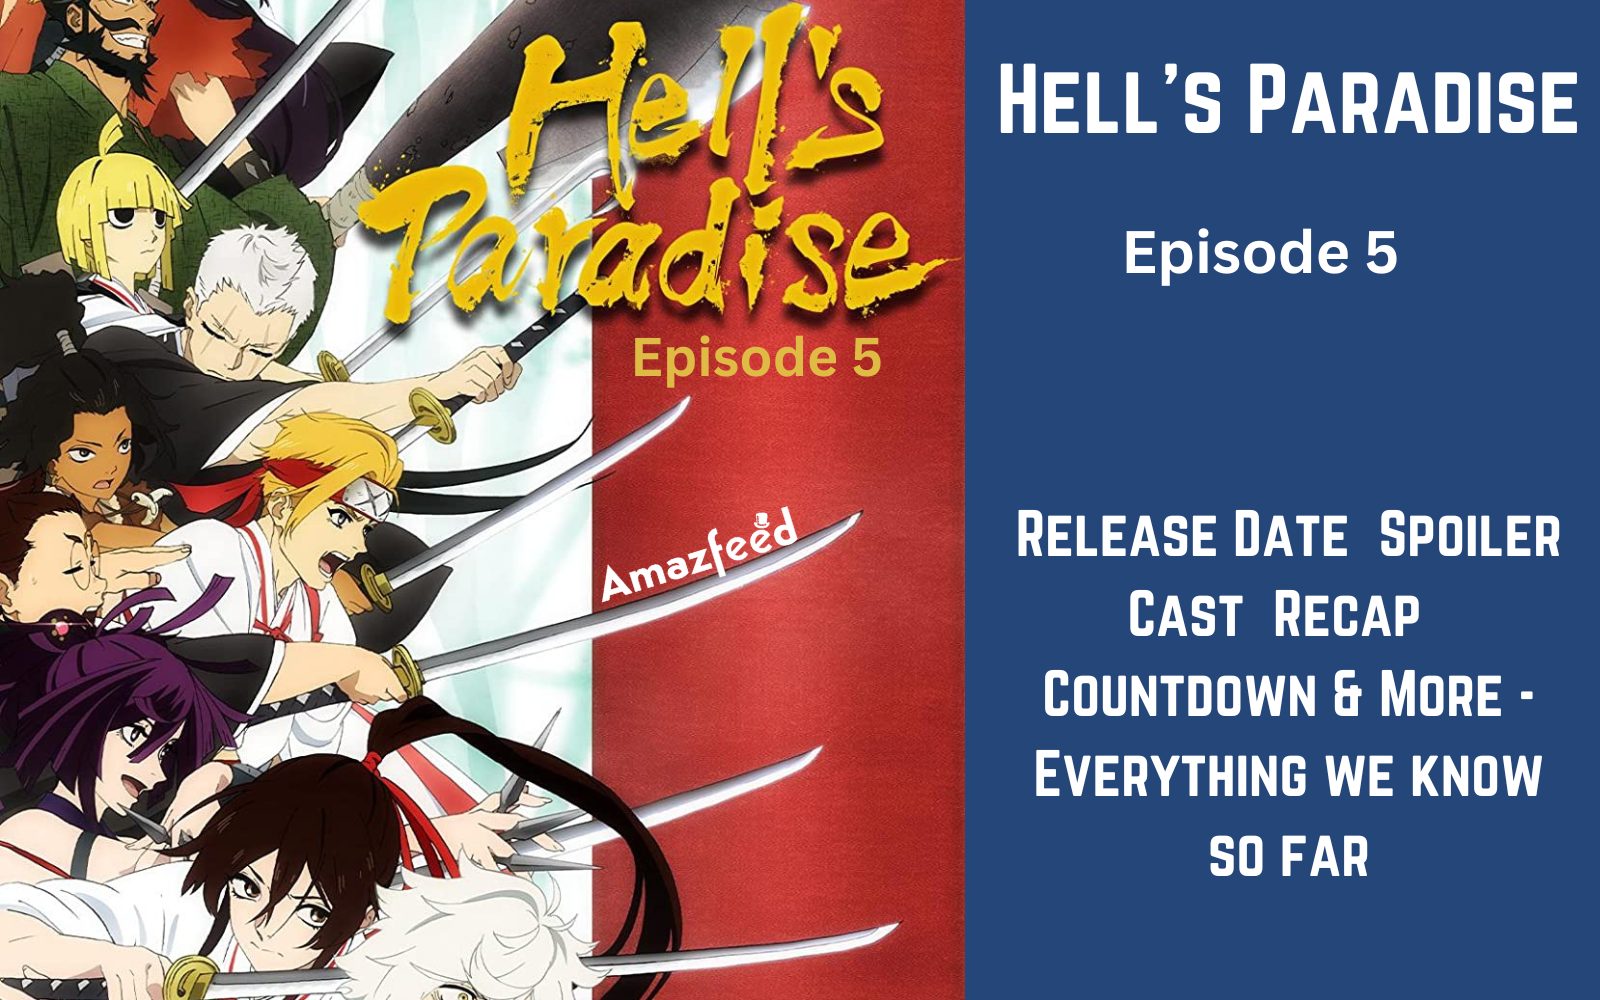 Hell's Paradise Episode 5 Release Date 